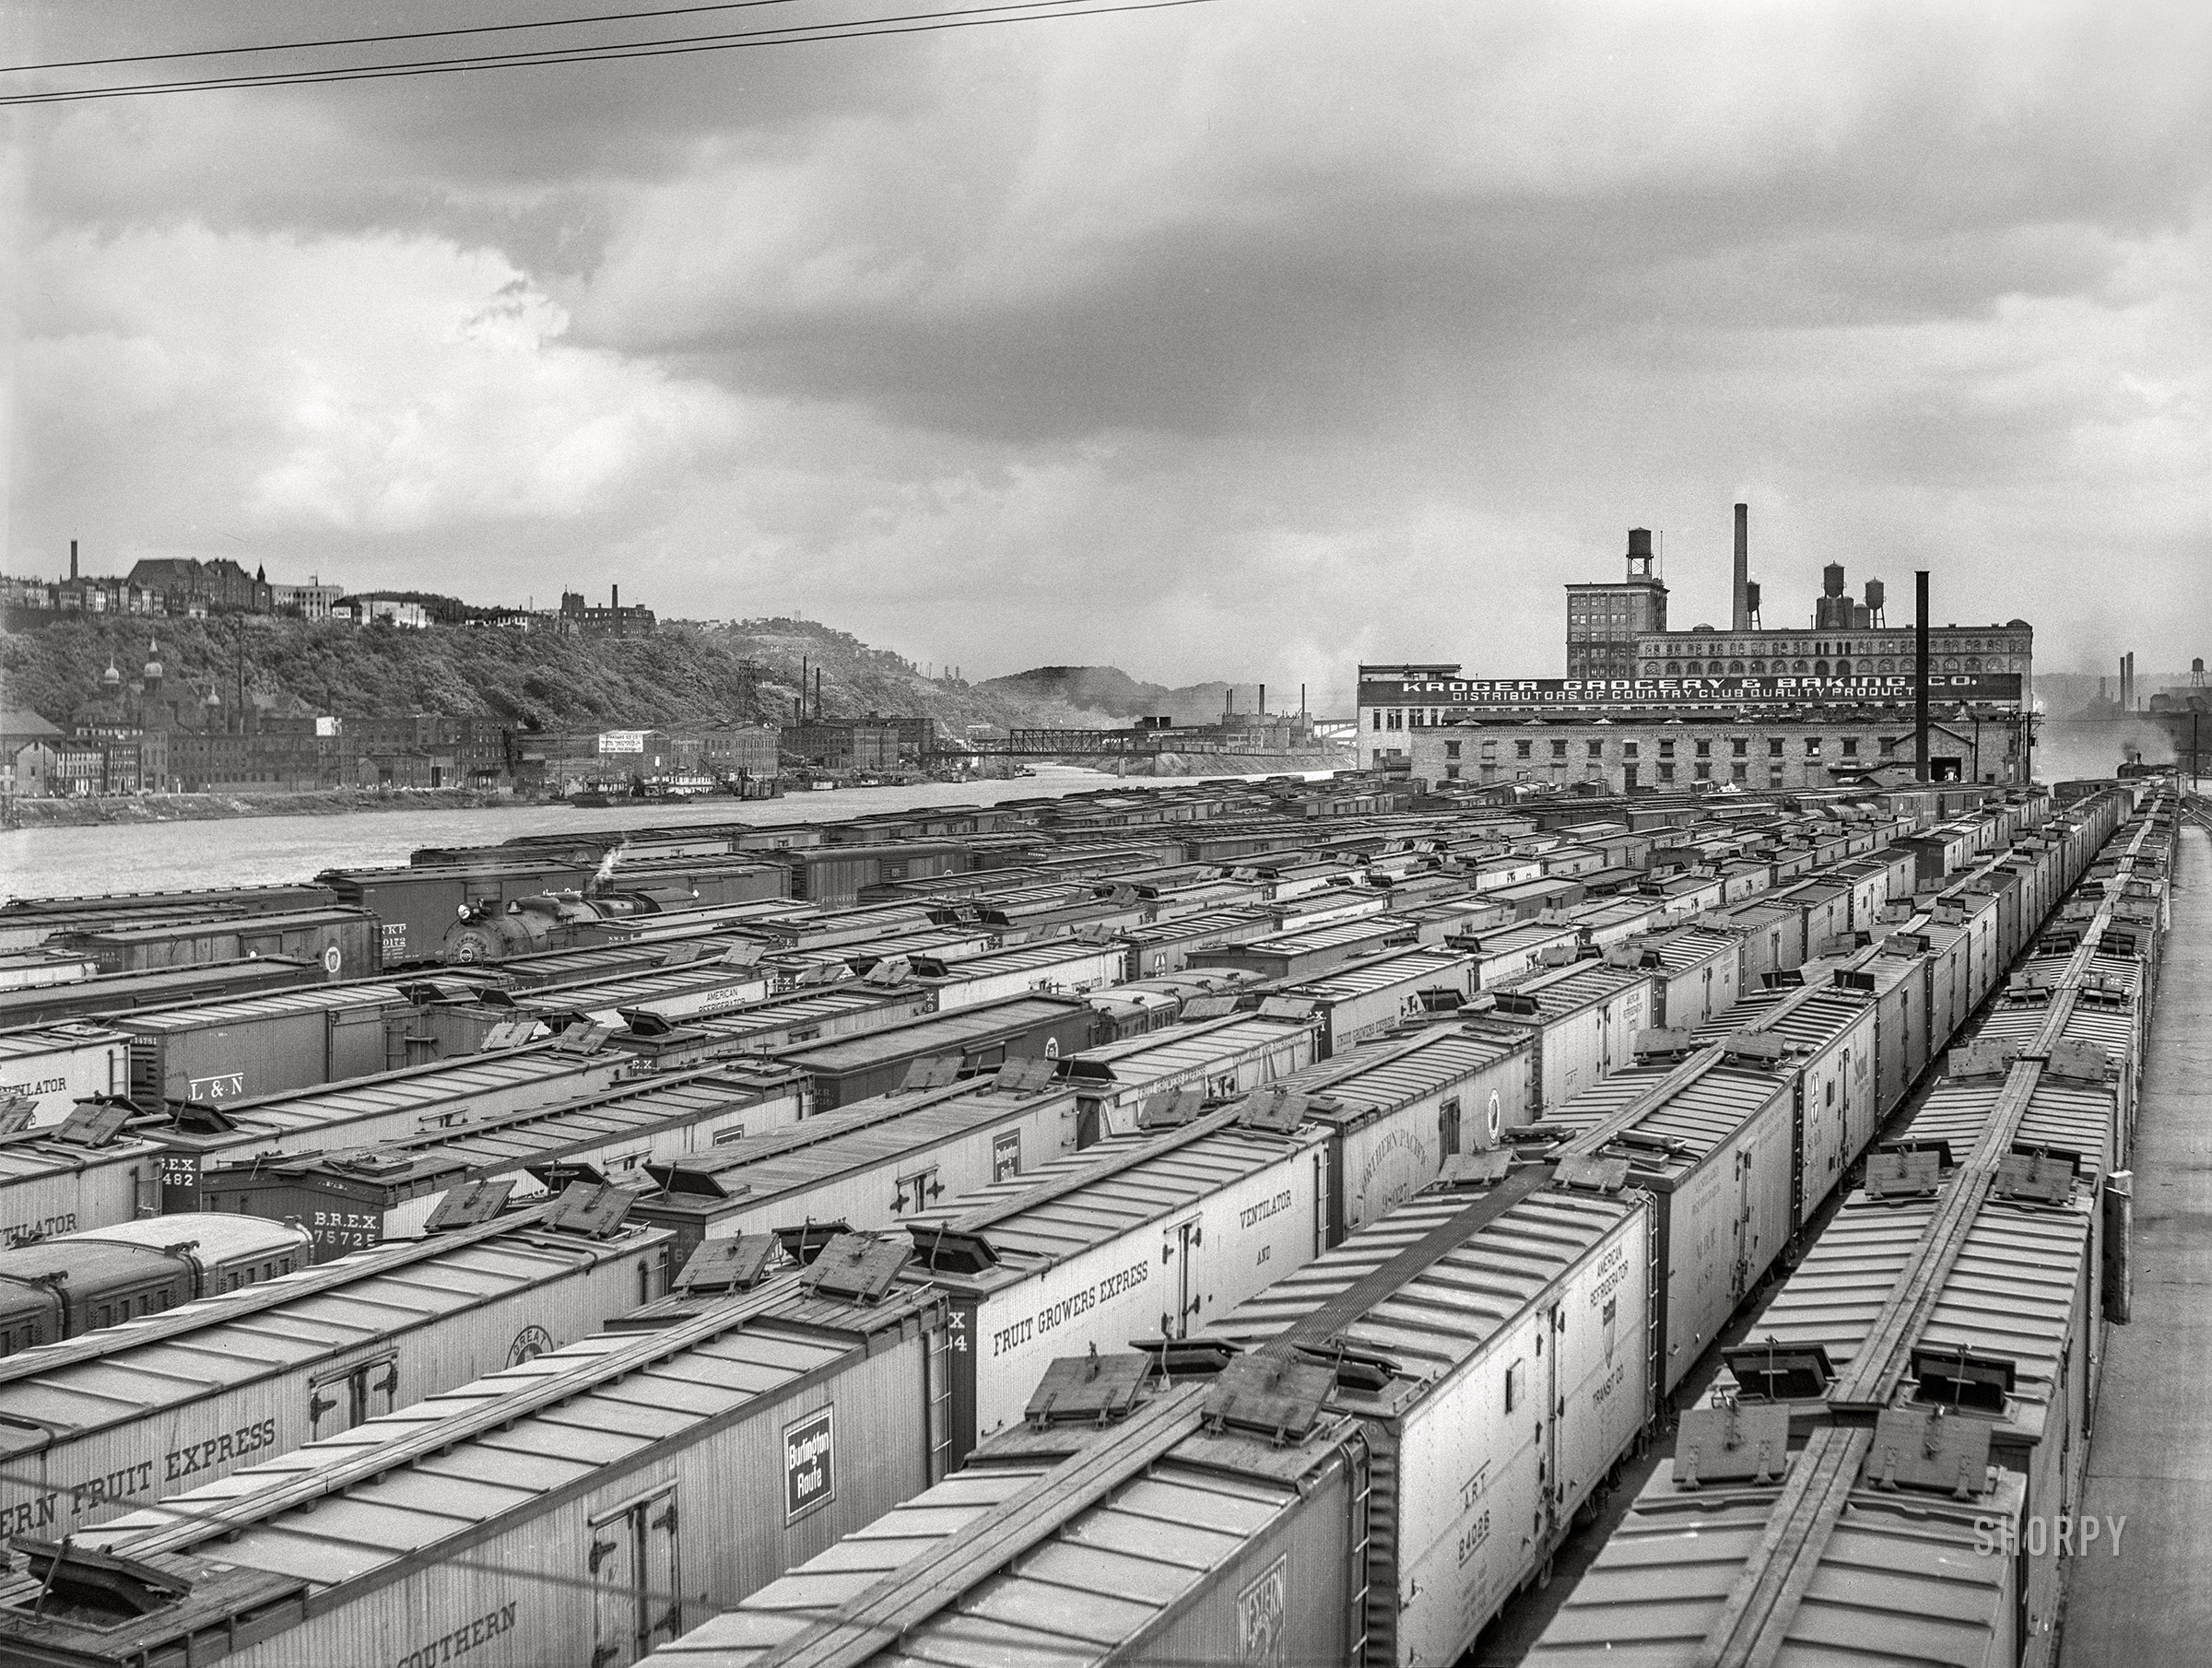 June 1941. "Carloads of fruit and vegetables at terminal. Pittsburgh, Pennsylvania." Medium format acetate negative by John Vachon for the Farm Security Administration. View full size.